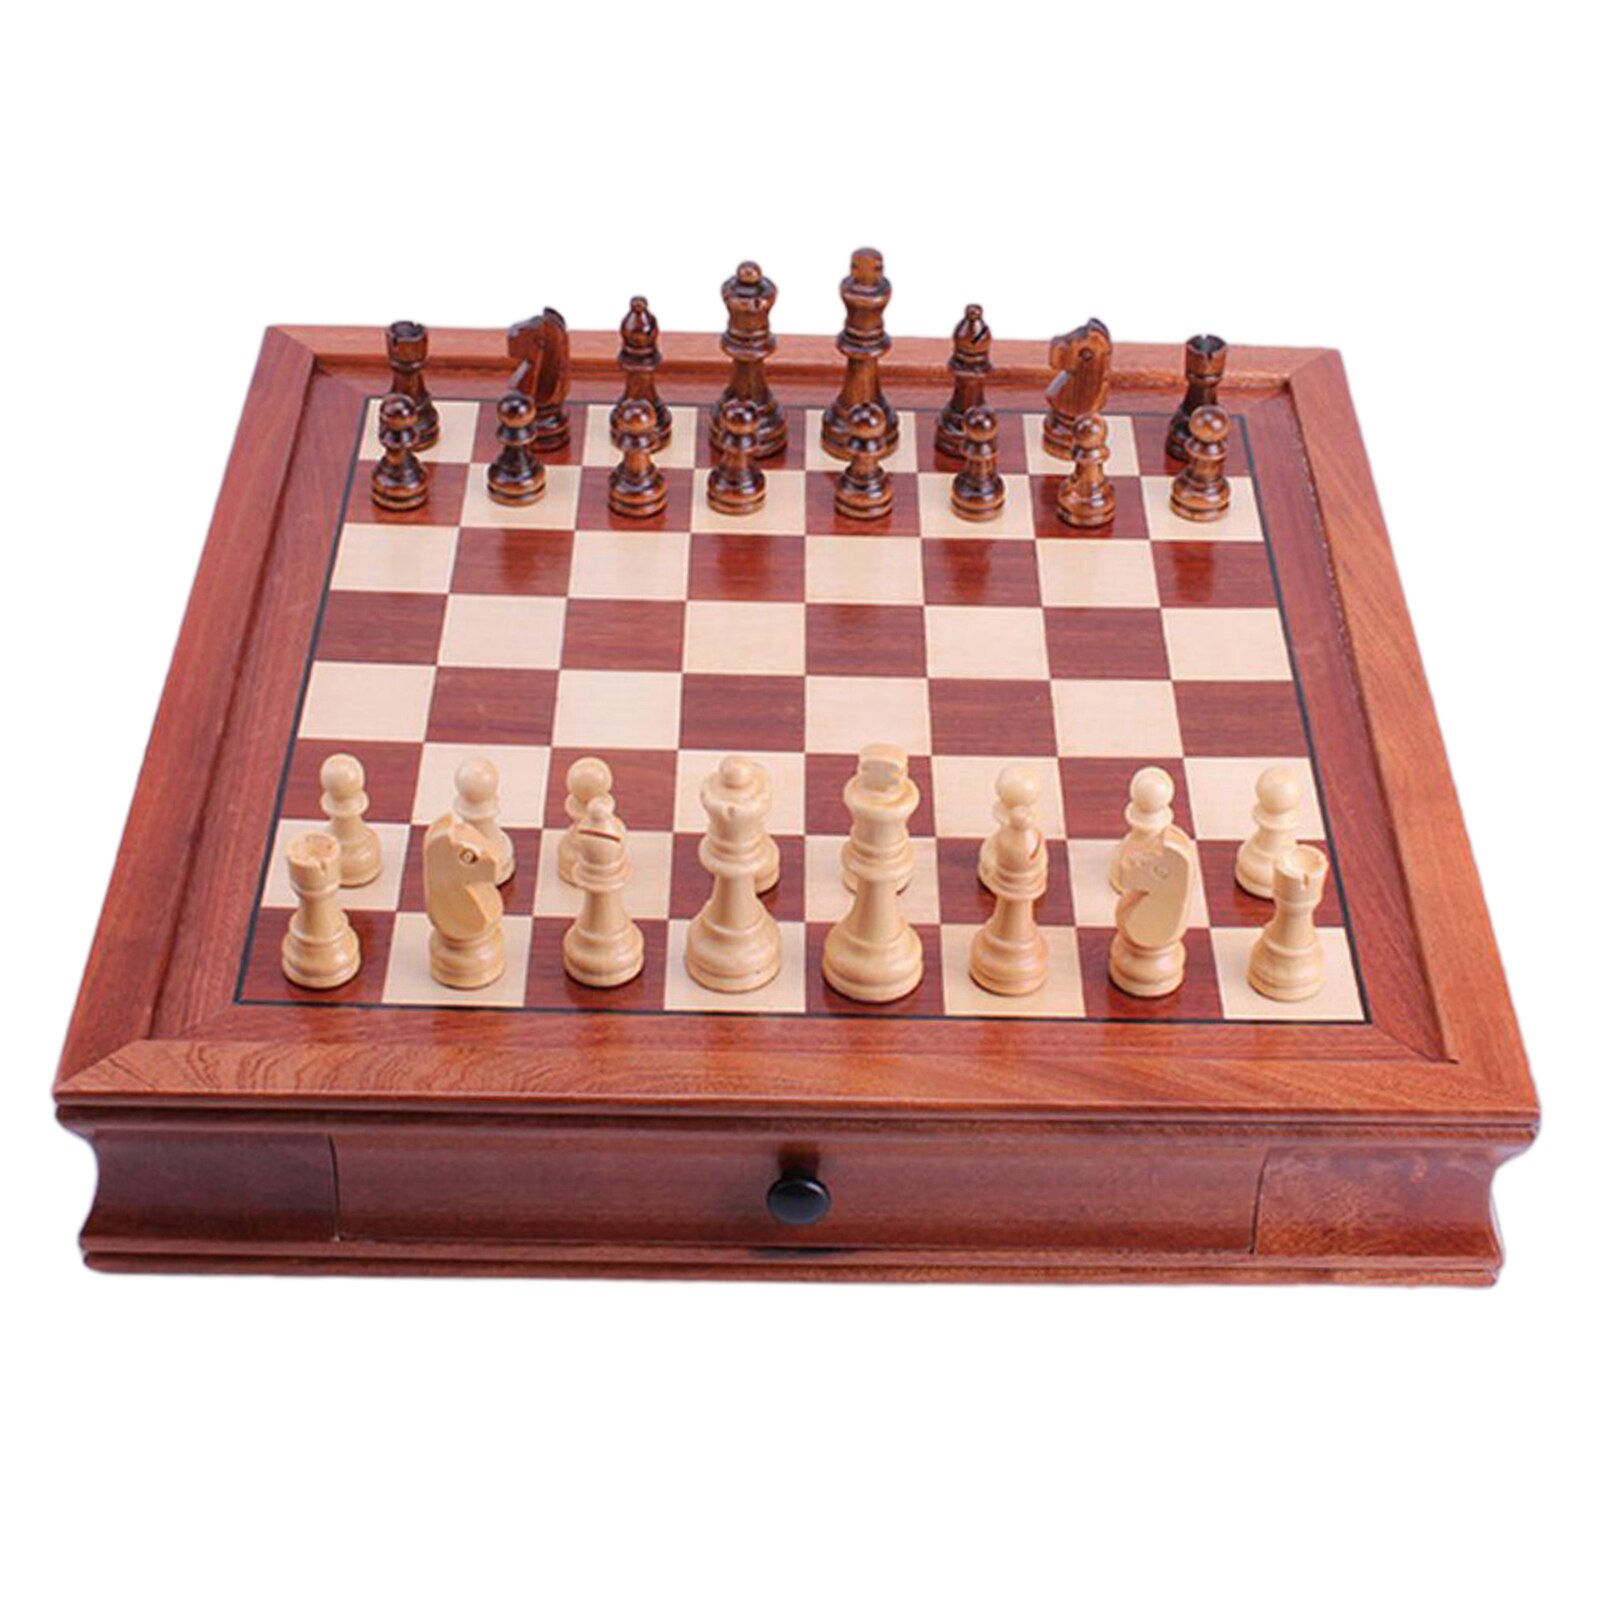 Classic Wooden Chessboard Puzzle Chess Board Game Teenager Adult Birthday Family Board Game